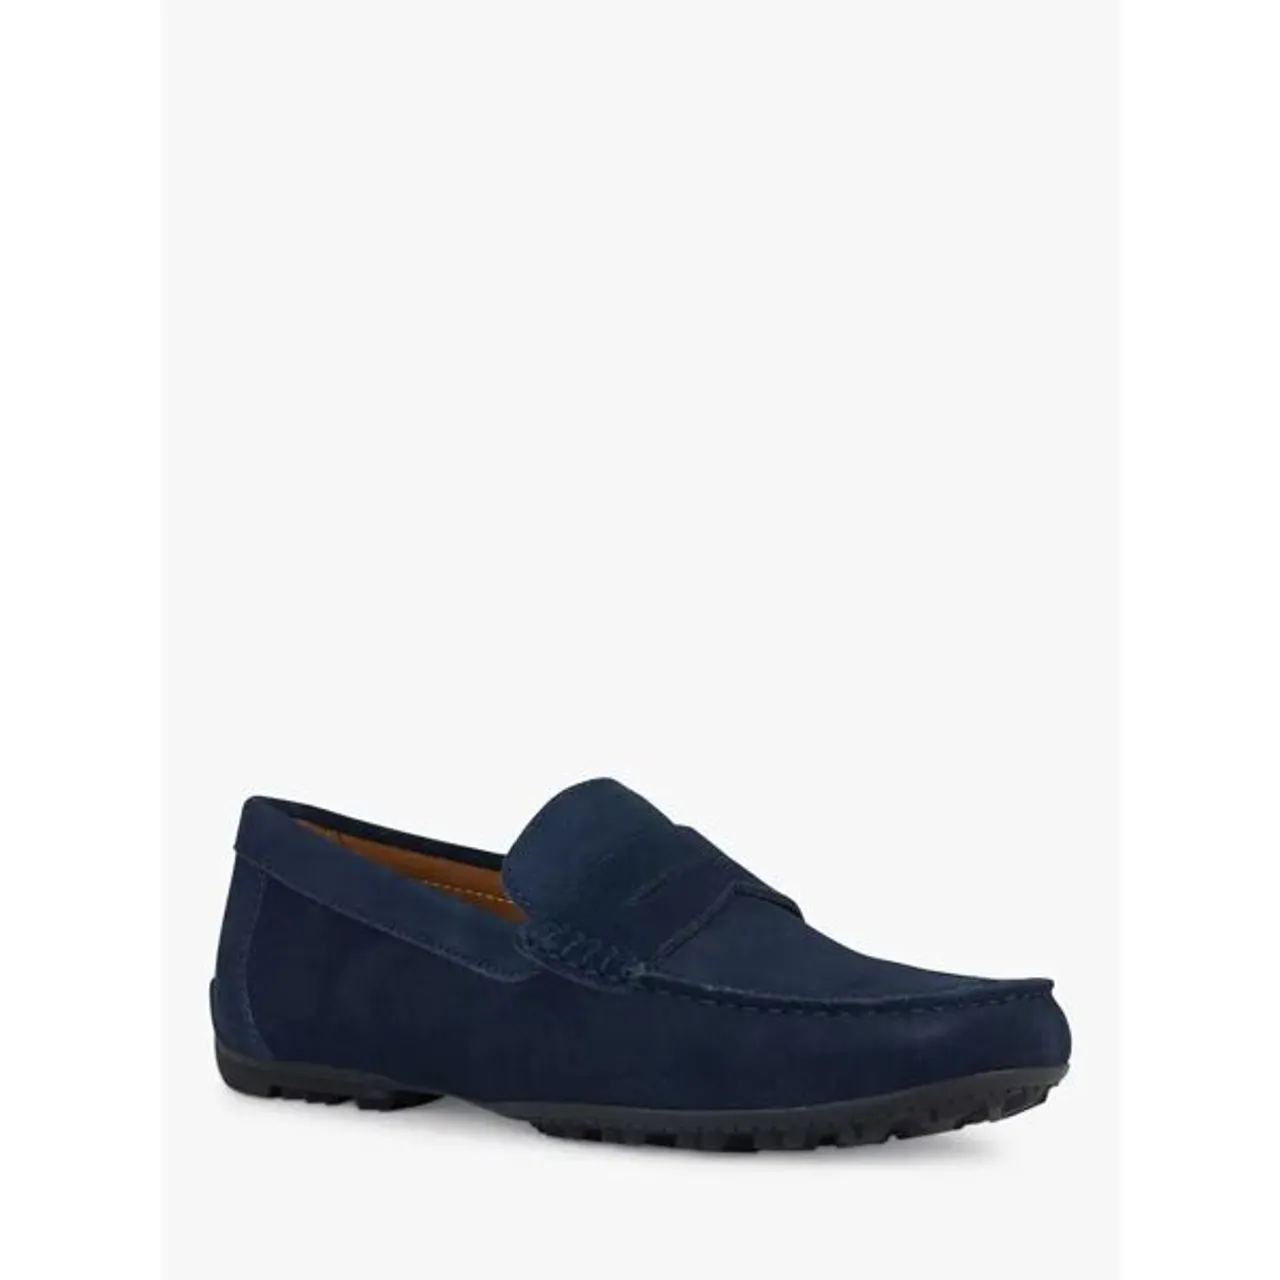 Geox Kosmopolis + Grip Leather Loafers - Navy - Male